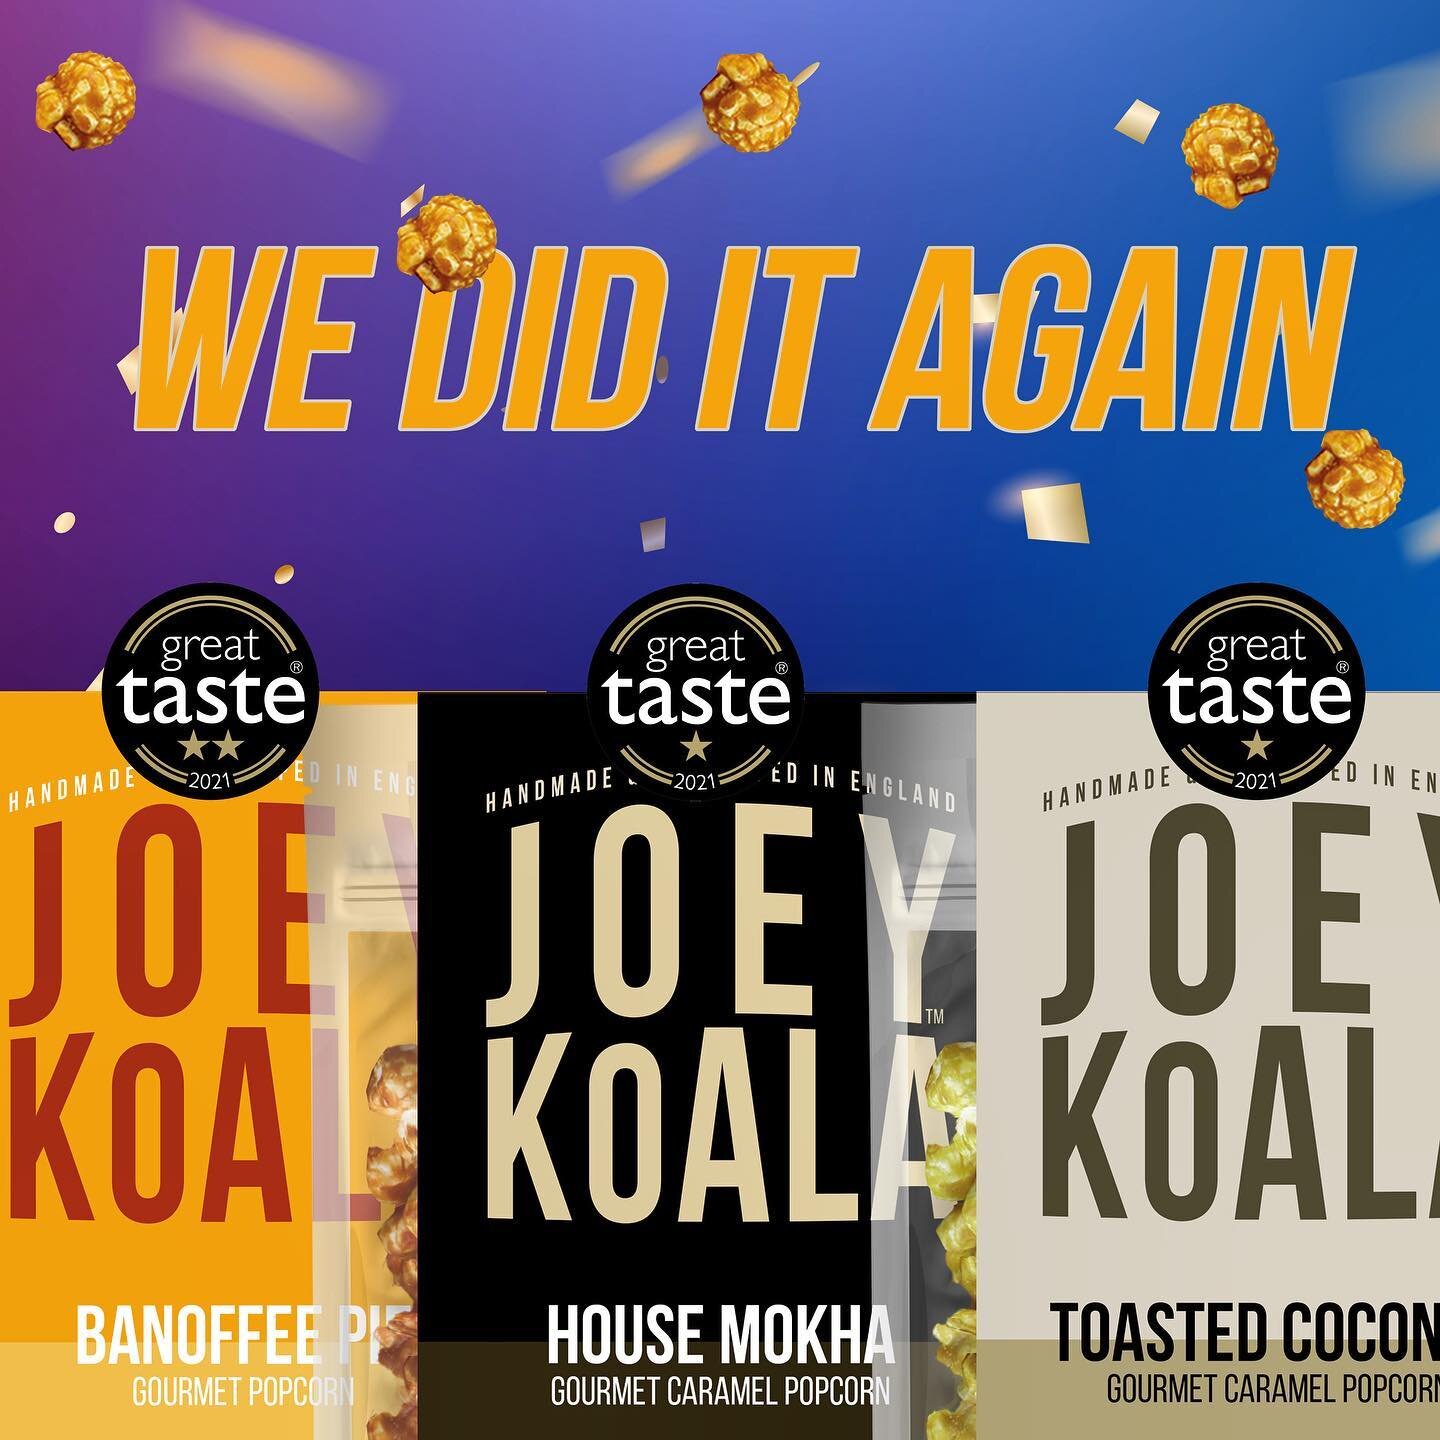 ⭐️⭐️WE DID IT AGAIN⭐️⭐️ We&rsquo;re proud to announce that our gourmet popcorns have won another 3 Great taste awards 🏅🏅 DELICIOUS AS EVER 🏅🏅